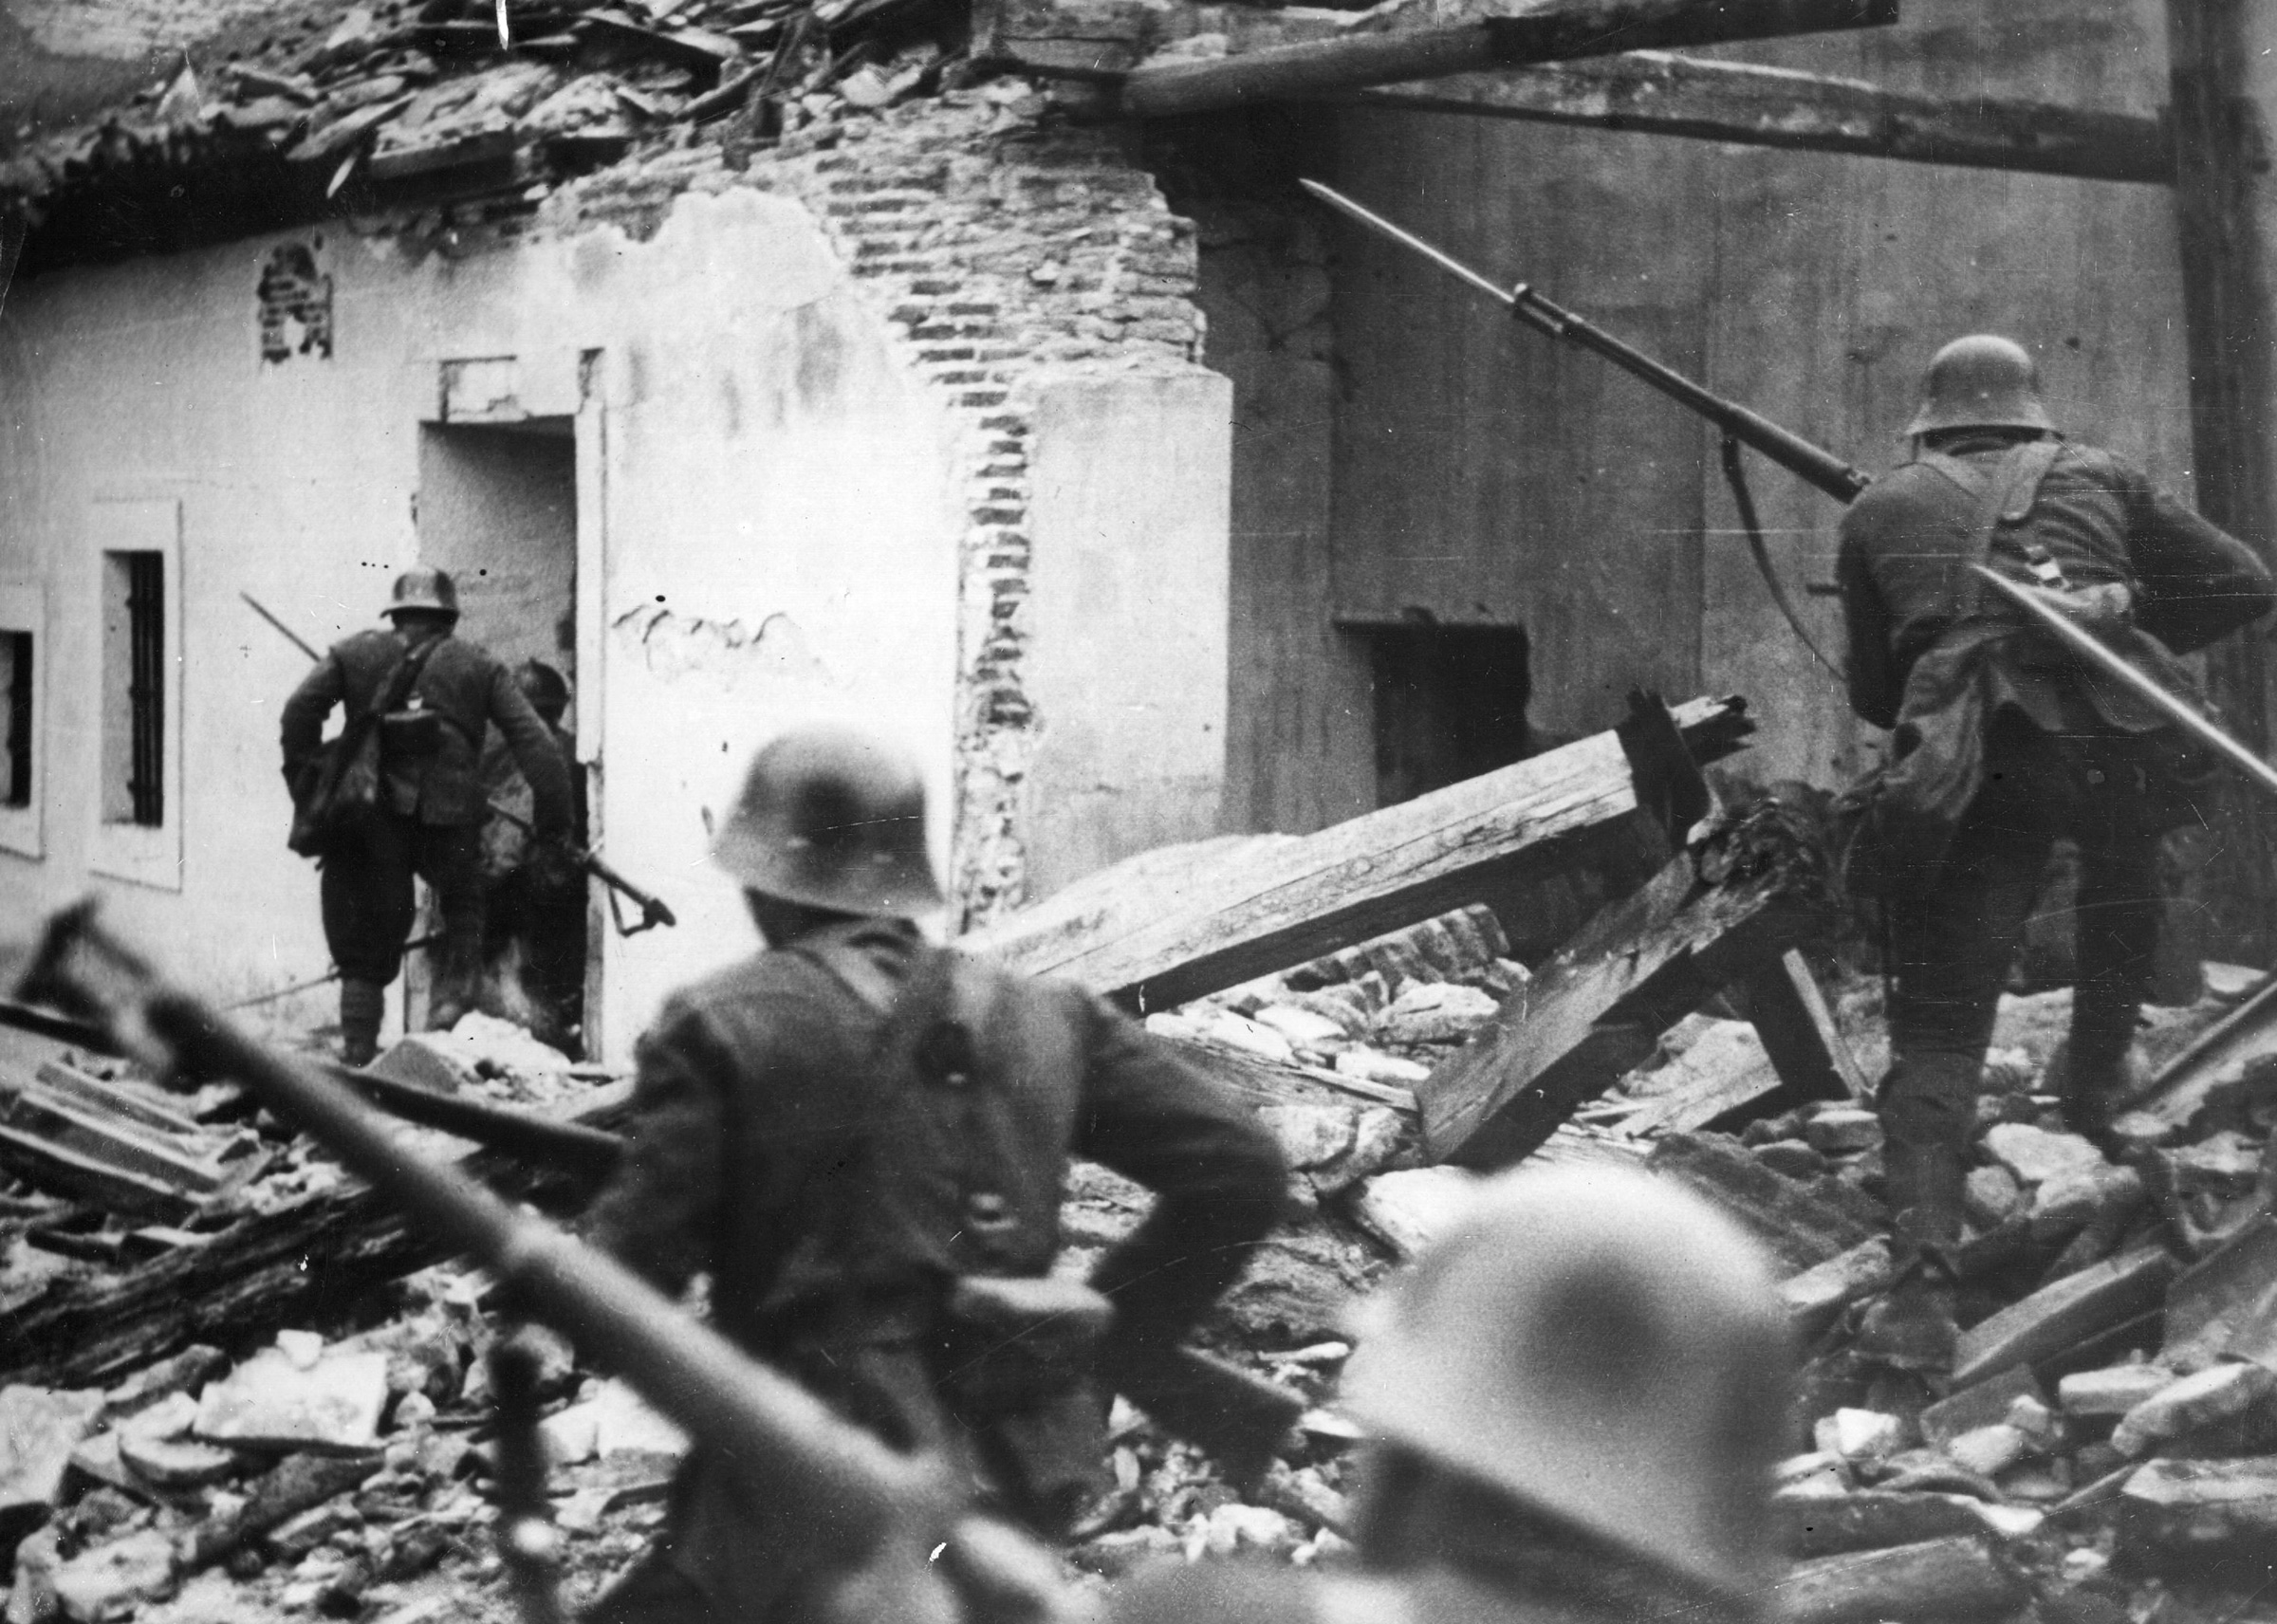 Nationalist troops advance through the debris of houses wrecked in air raids in Madrid, on April 2, 1937. (Hulton Archive/Getty Images)